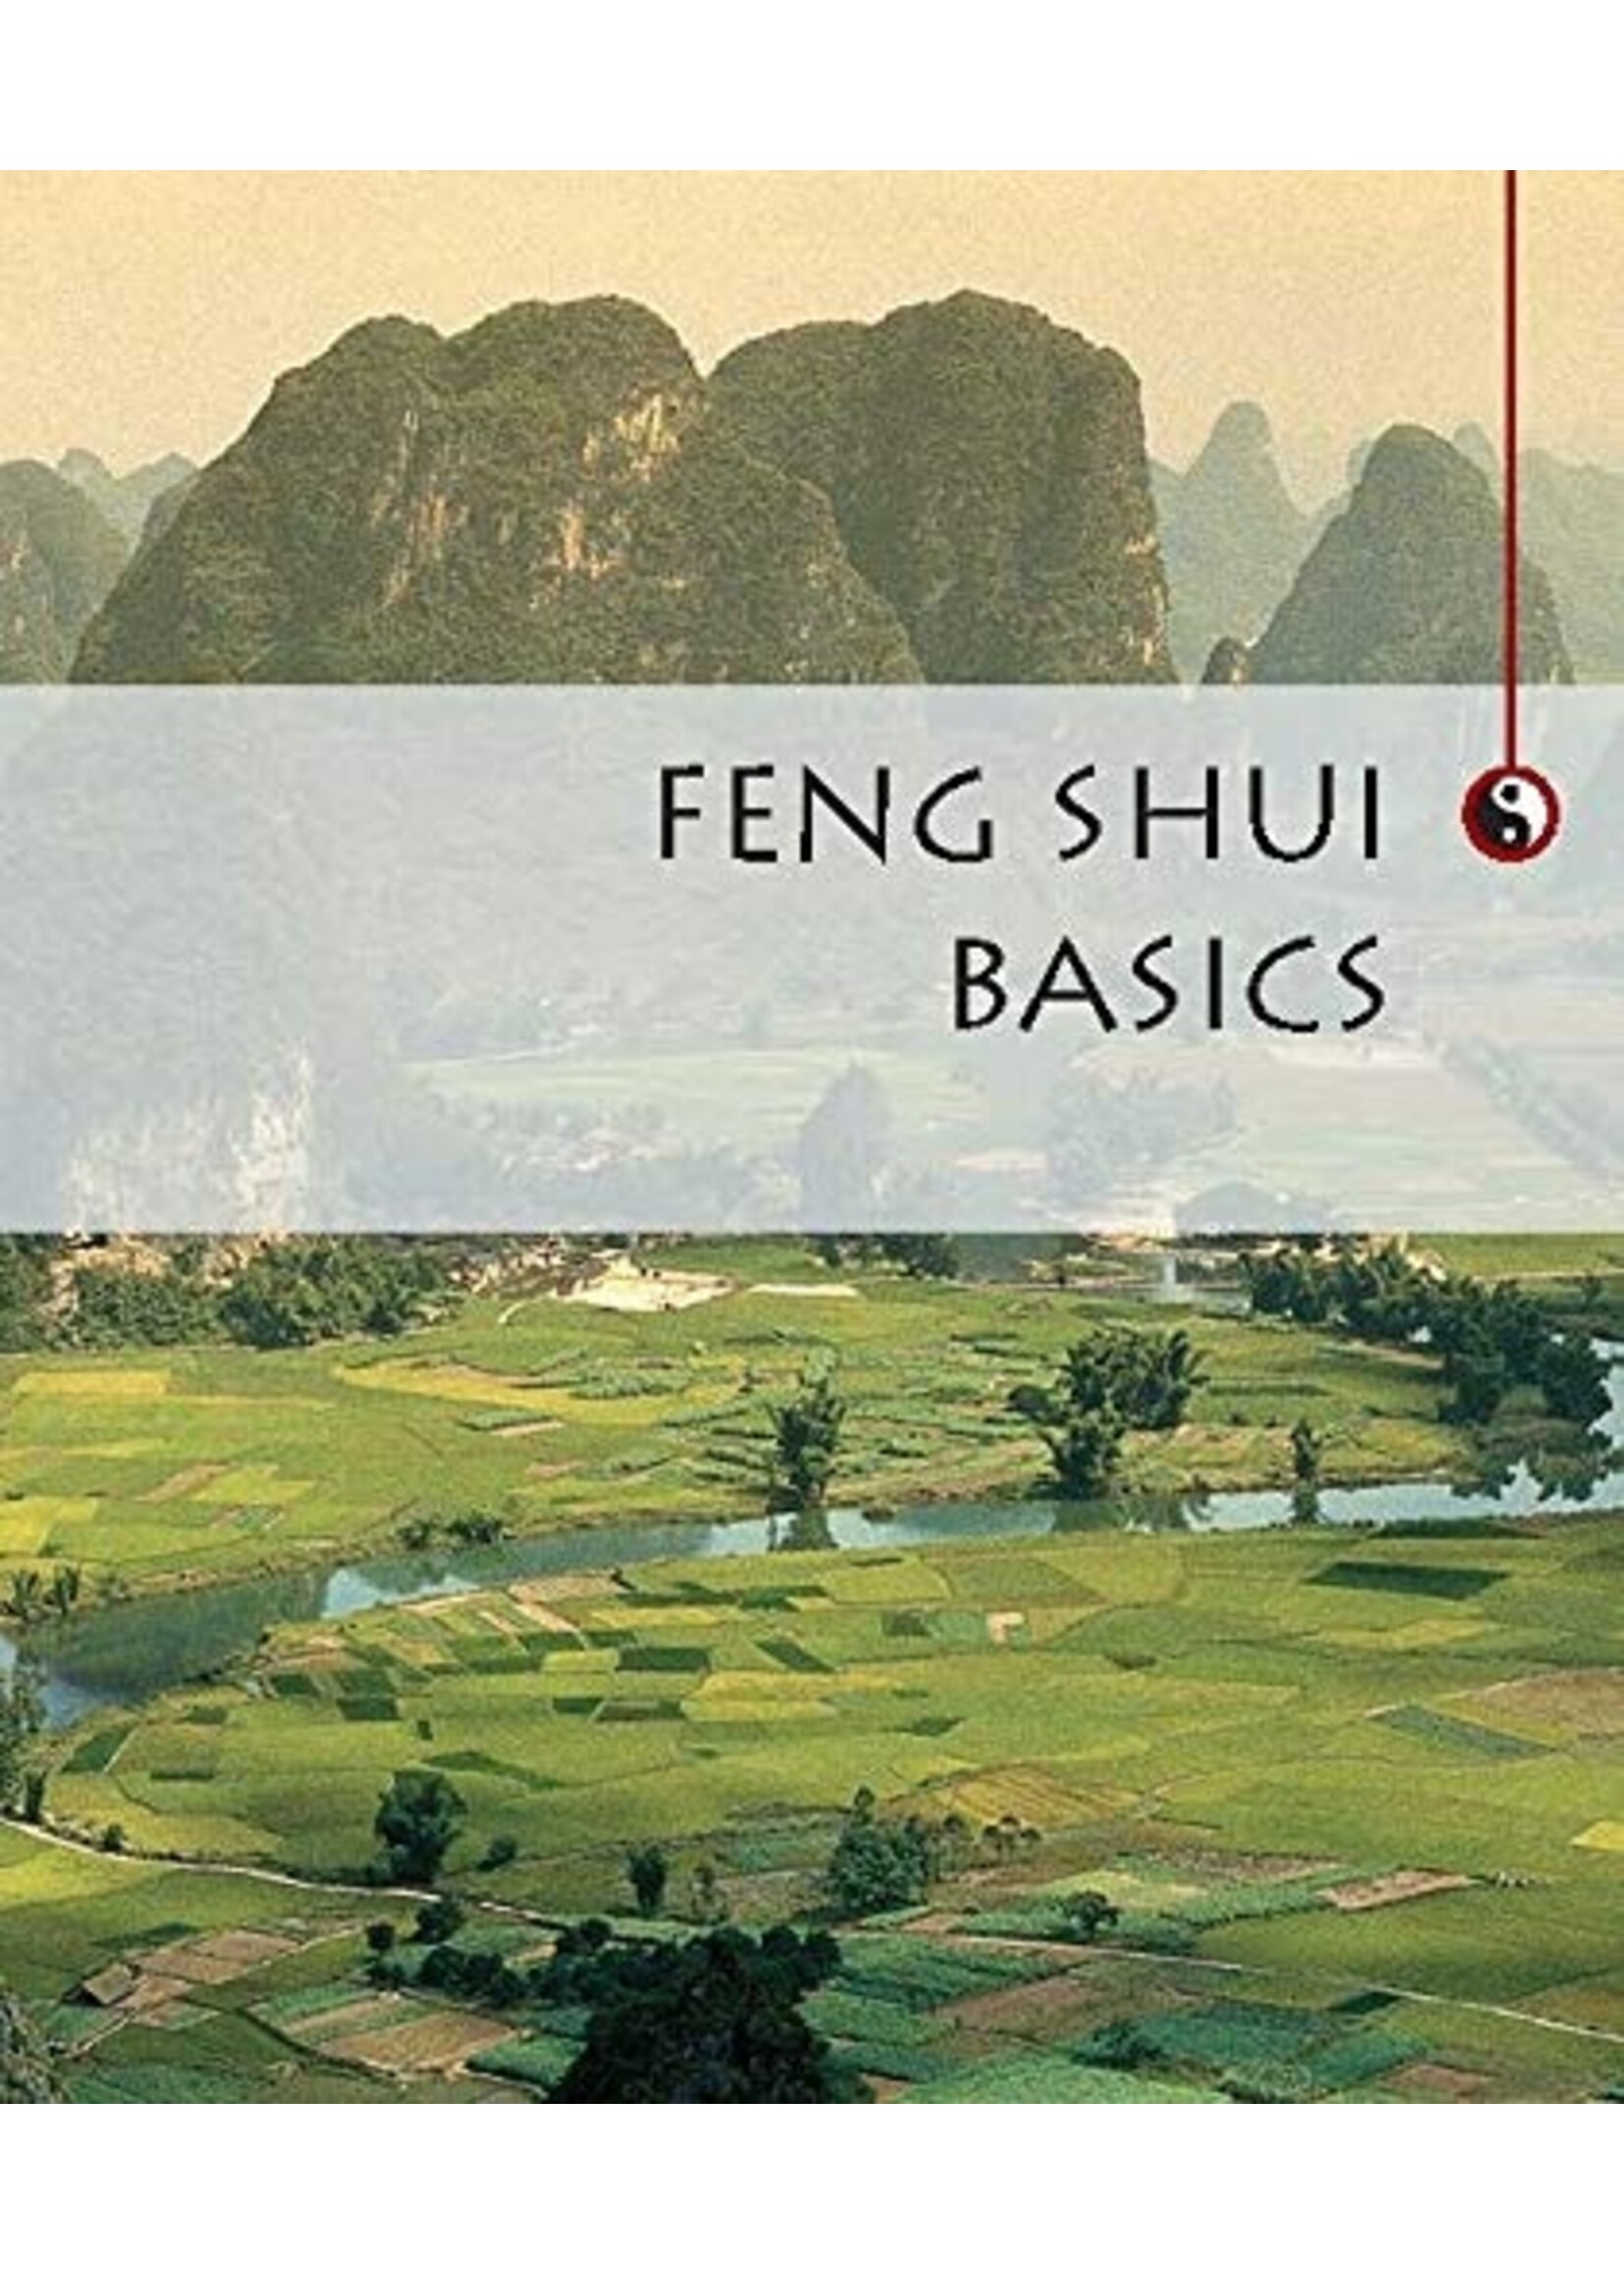 Feng Shui Bible The Definitive Guide to Improving Your Life Home Health & Fin